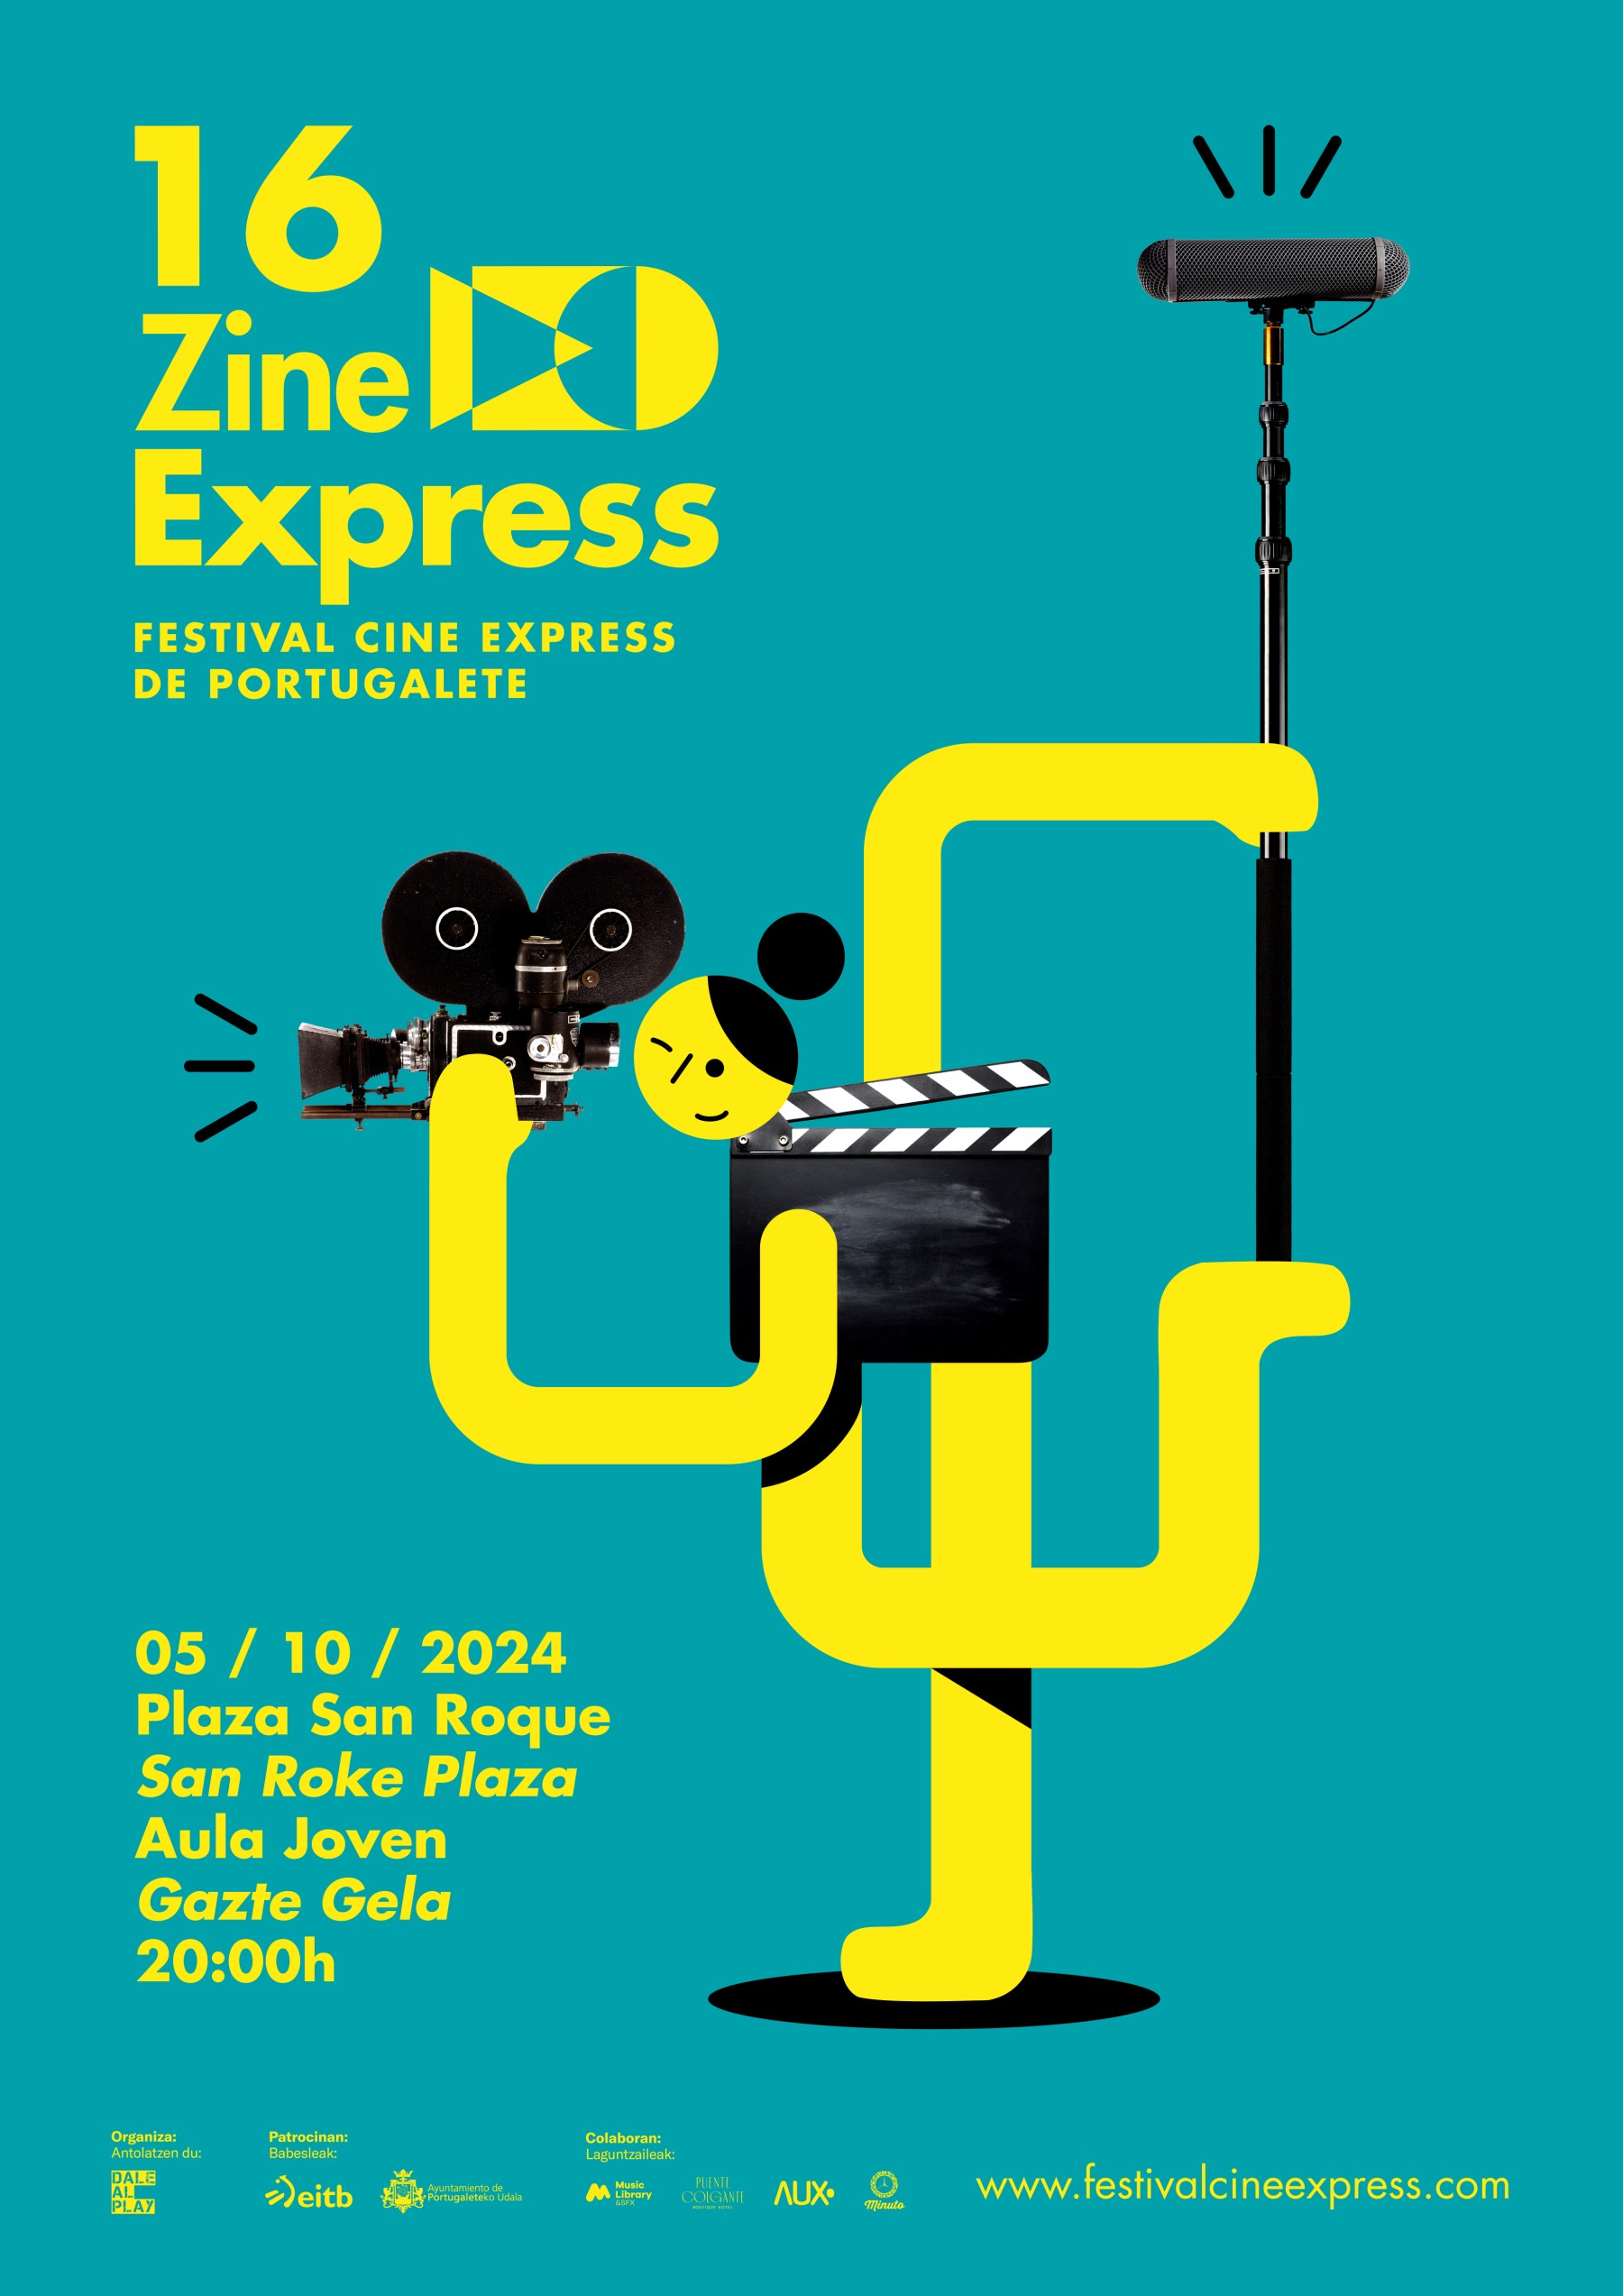 REGISTRATIONS OPEN TO PARTICIPATE IN THE XVI EXPRESS FILM FESTIVAL OF PORTUGALETE